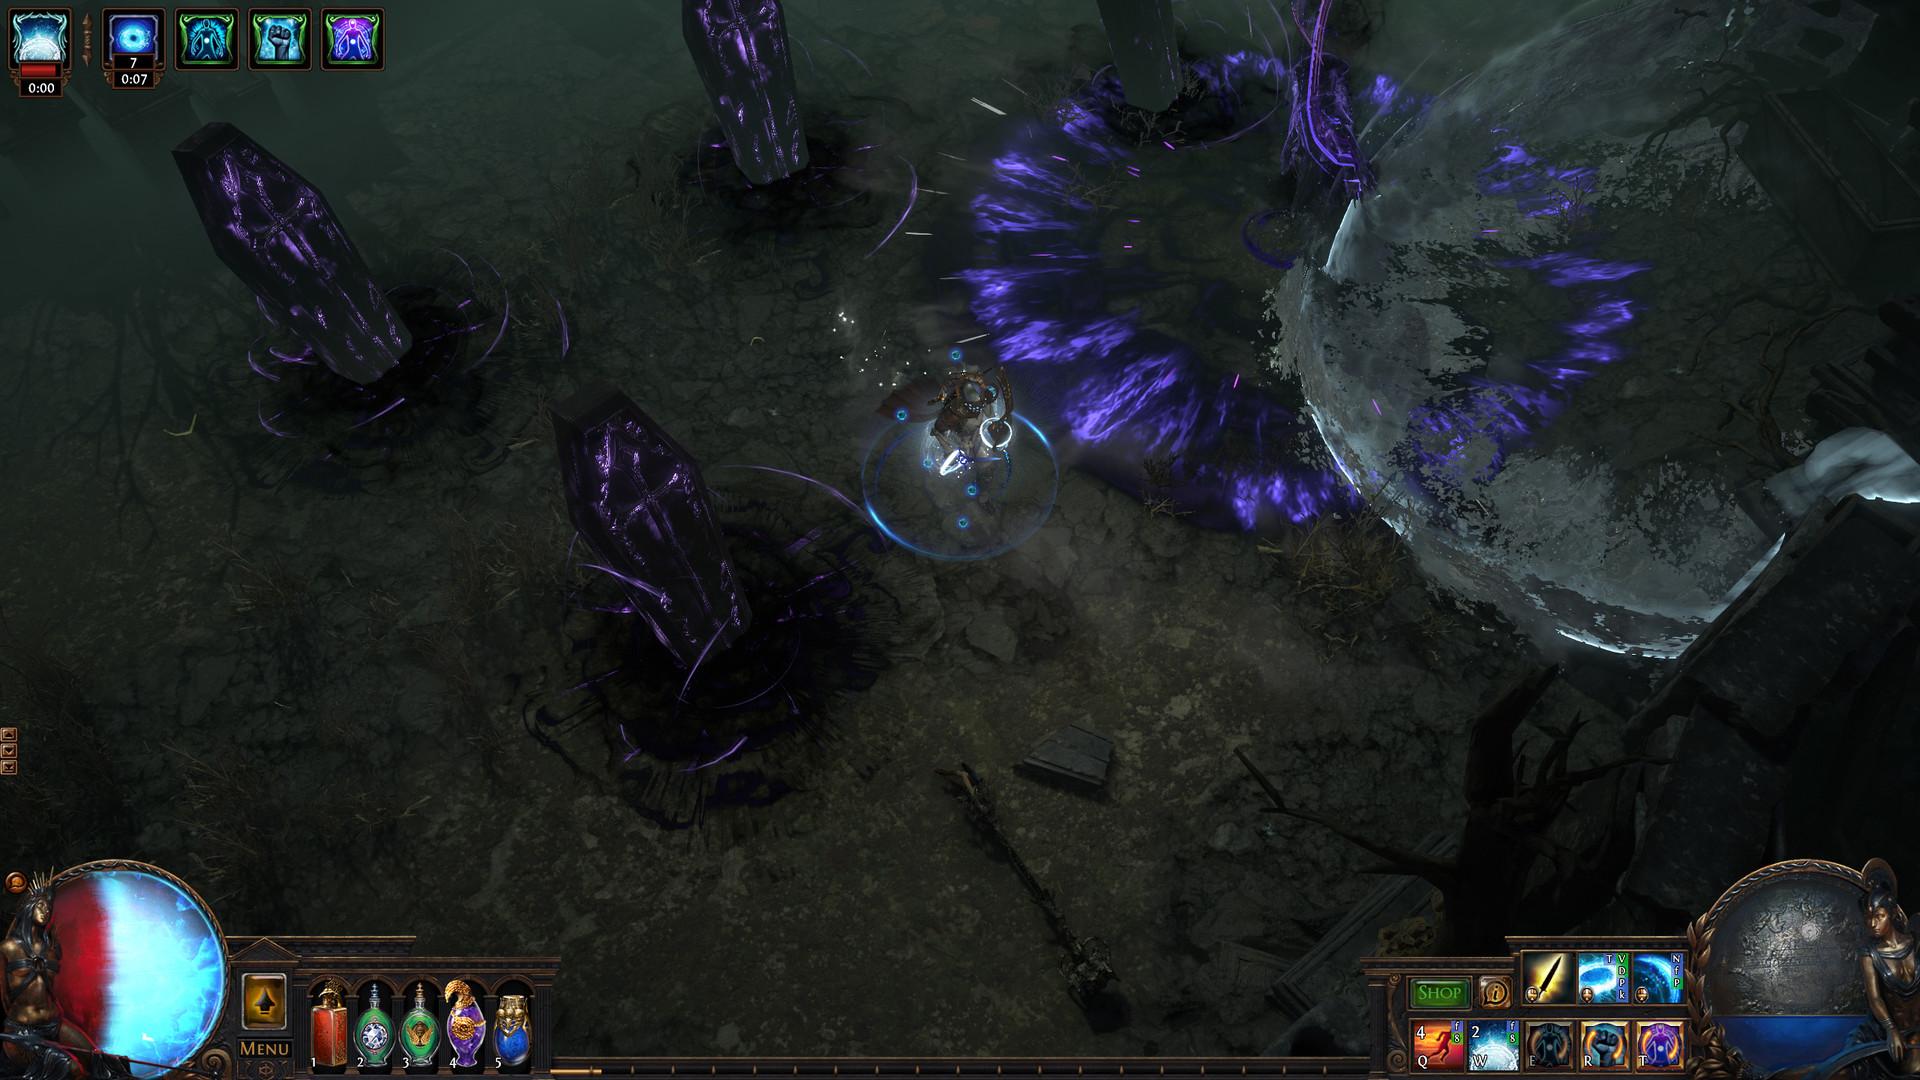 Screenshot №12 from game Path of Exile